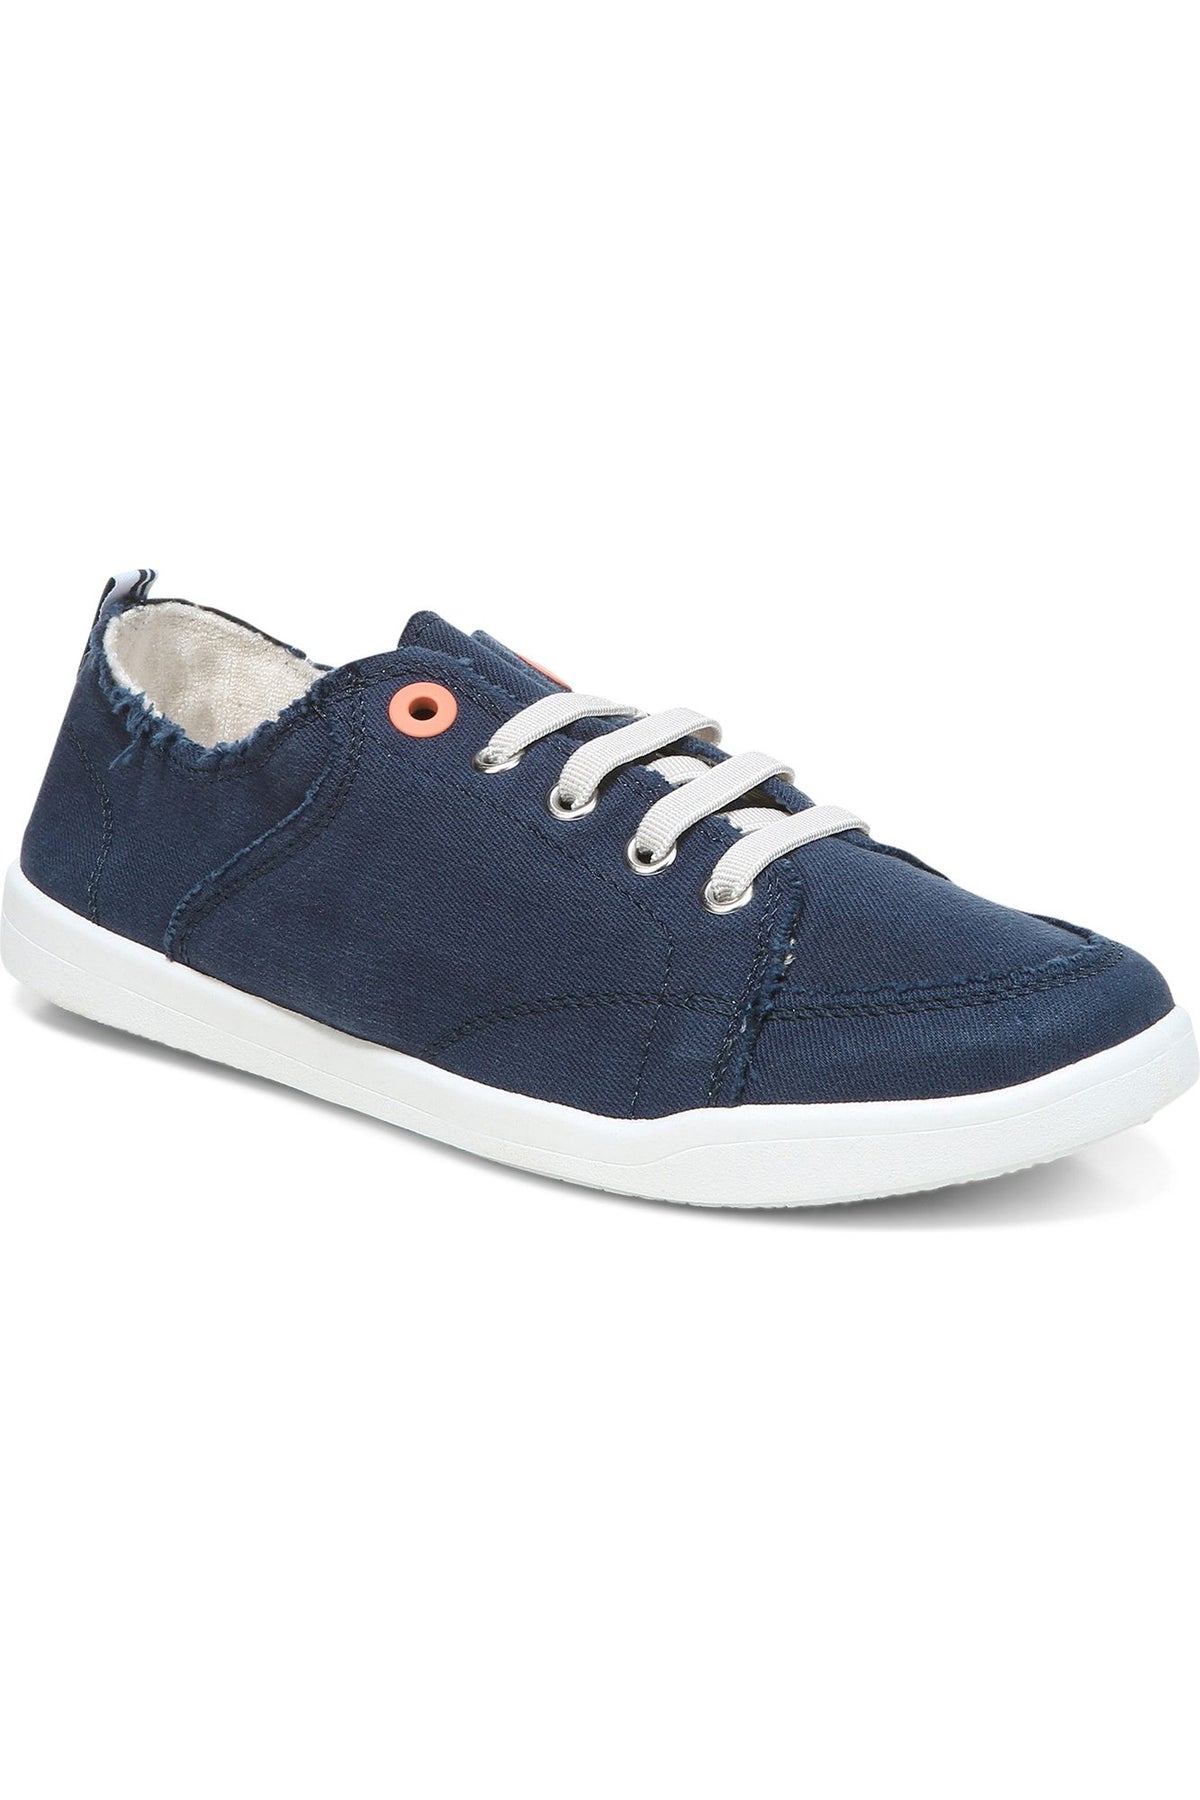 Vionic Canvas Lace-Up Sneaker - Style Pismo NAV, side